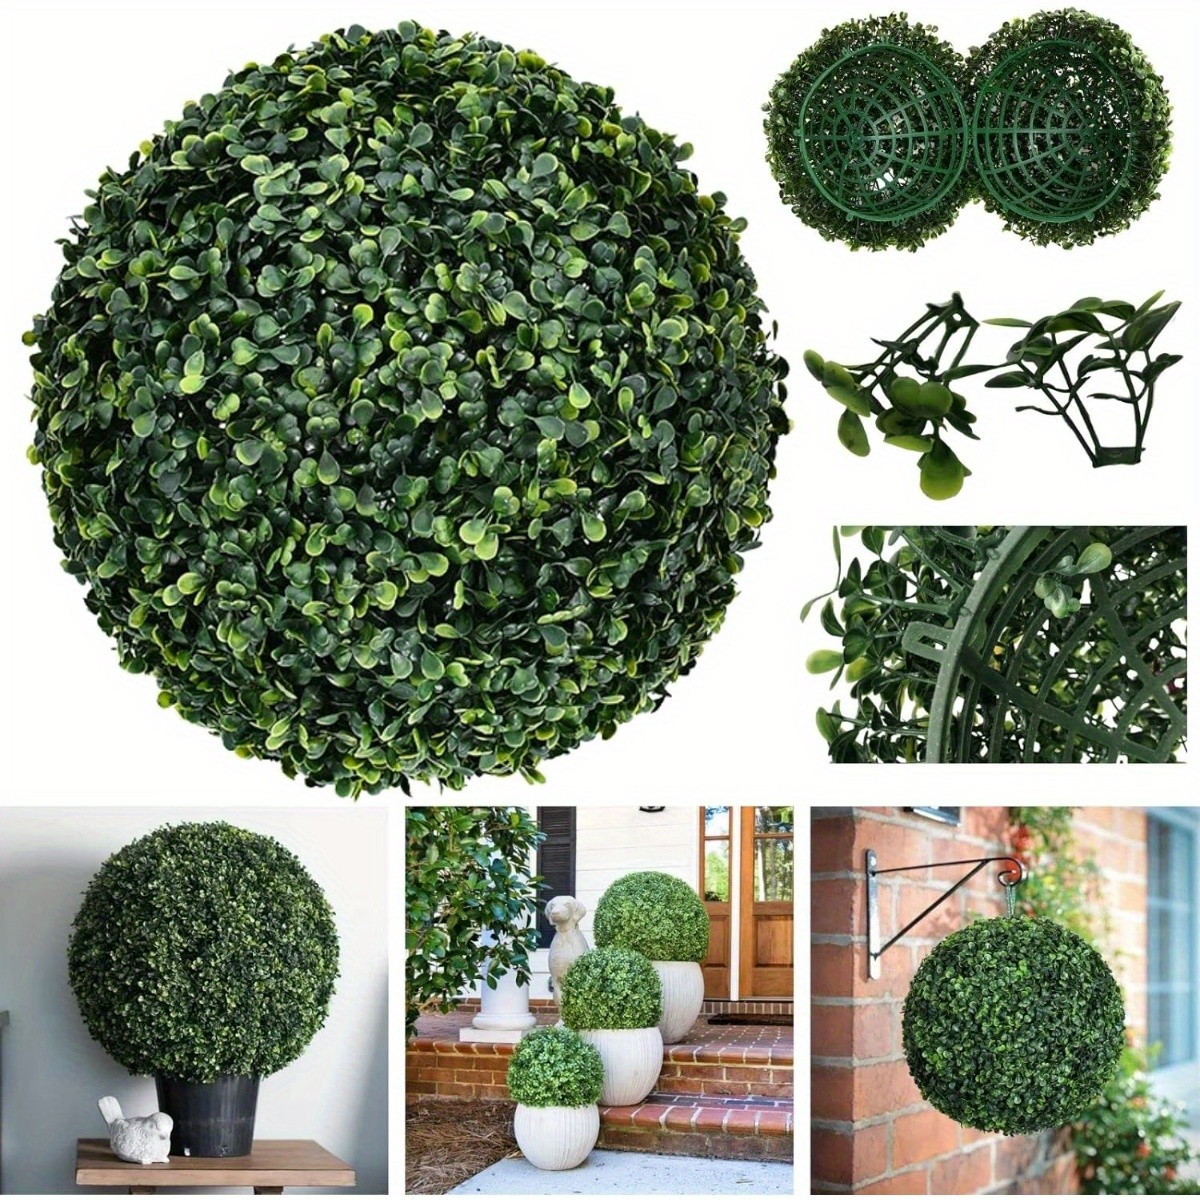 

Artificial Boxwood Topiary Ball - 28cm/11in Plastic Green Plant Decoration For Garden, Home, Wedding, Patio - Durable Imitation Grass Sphere For Outdoor And Indoor Decor - 1pc